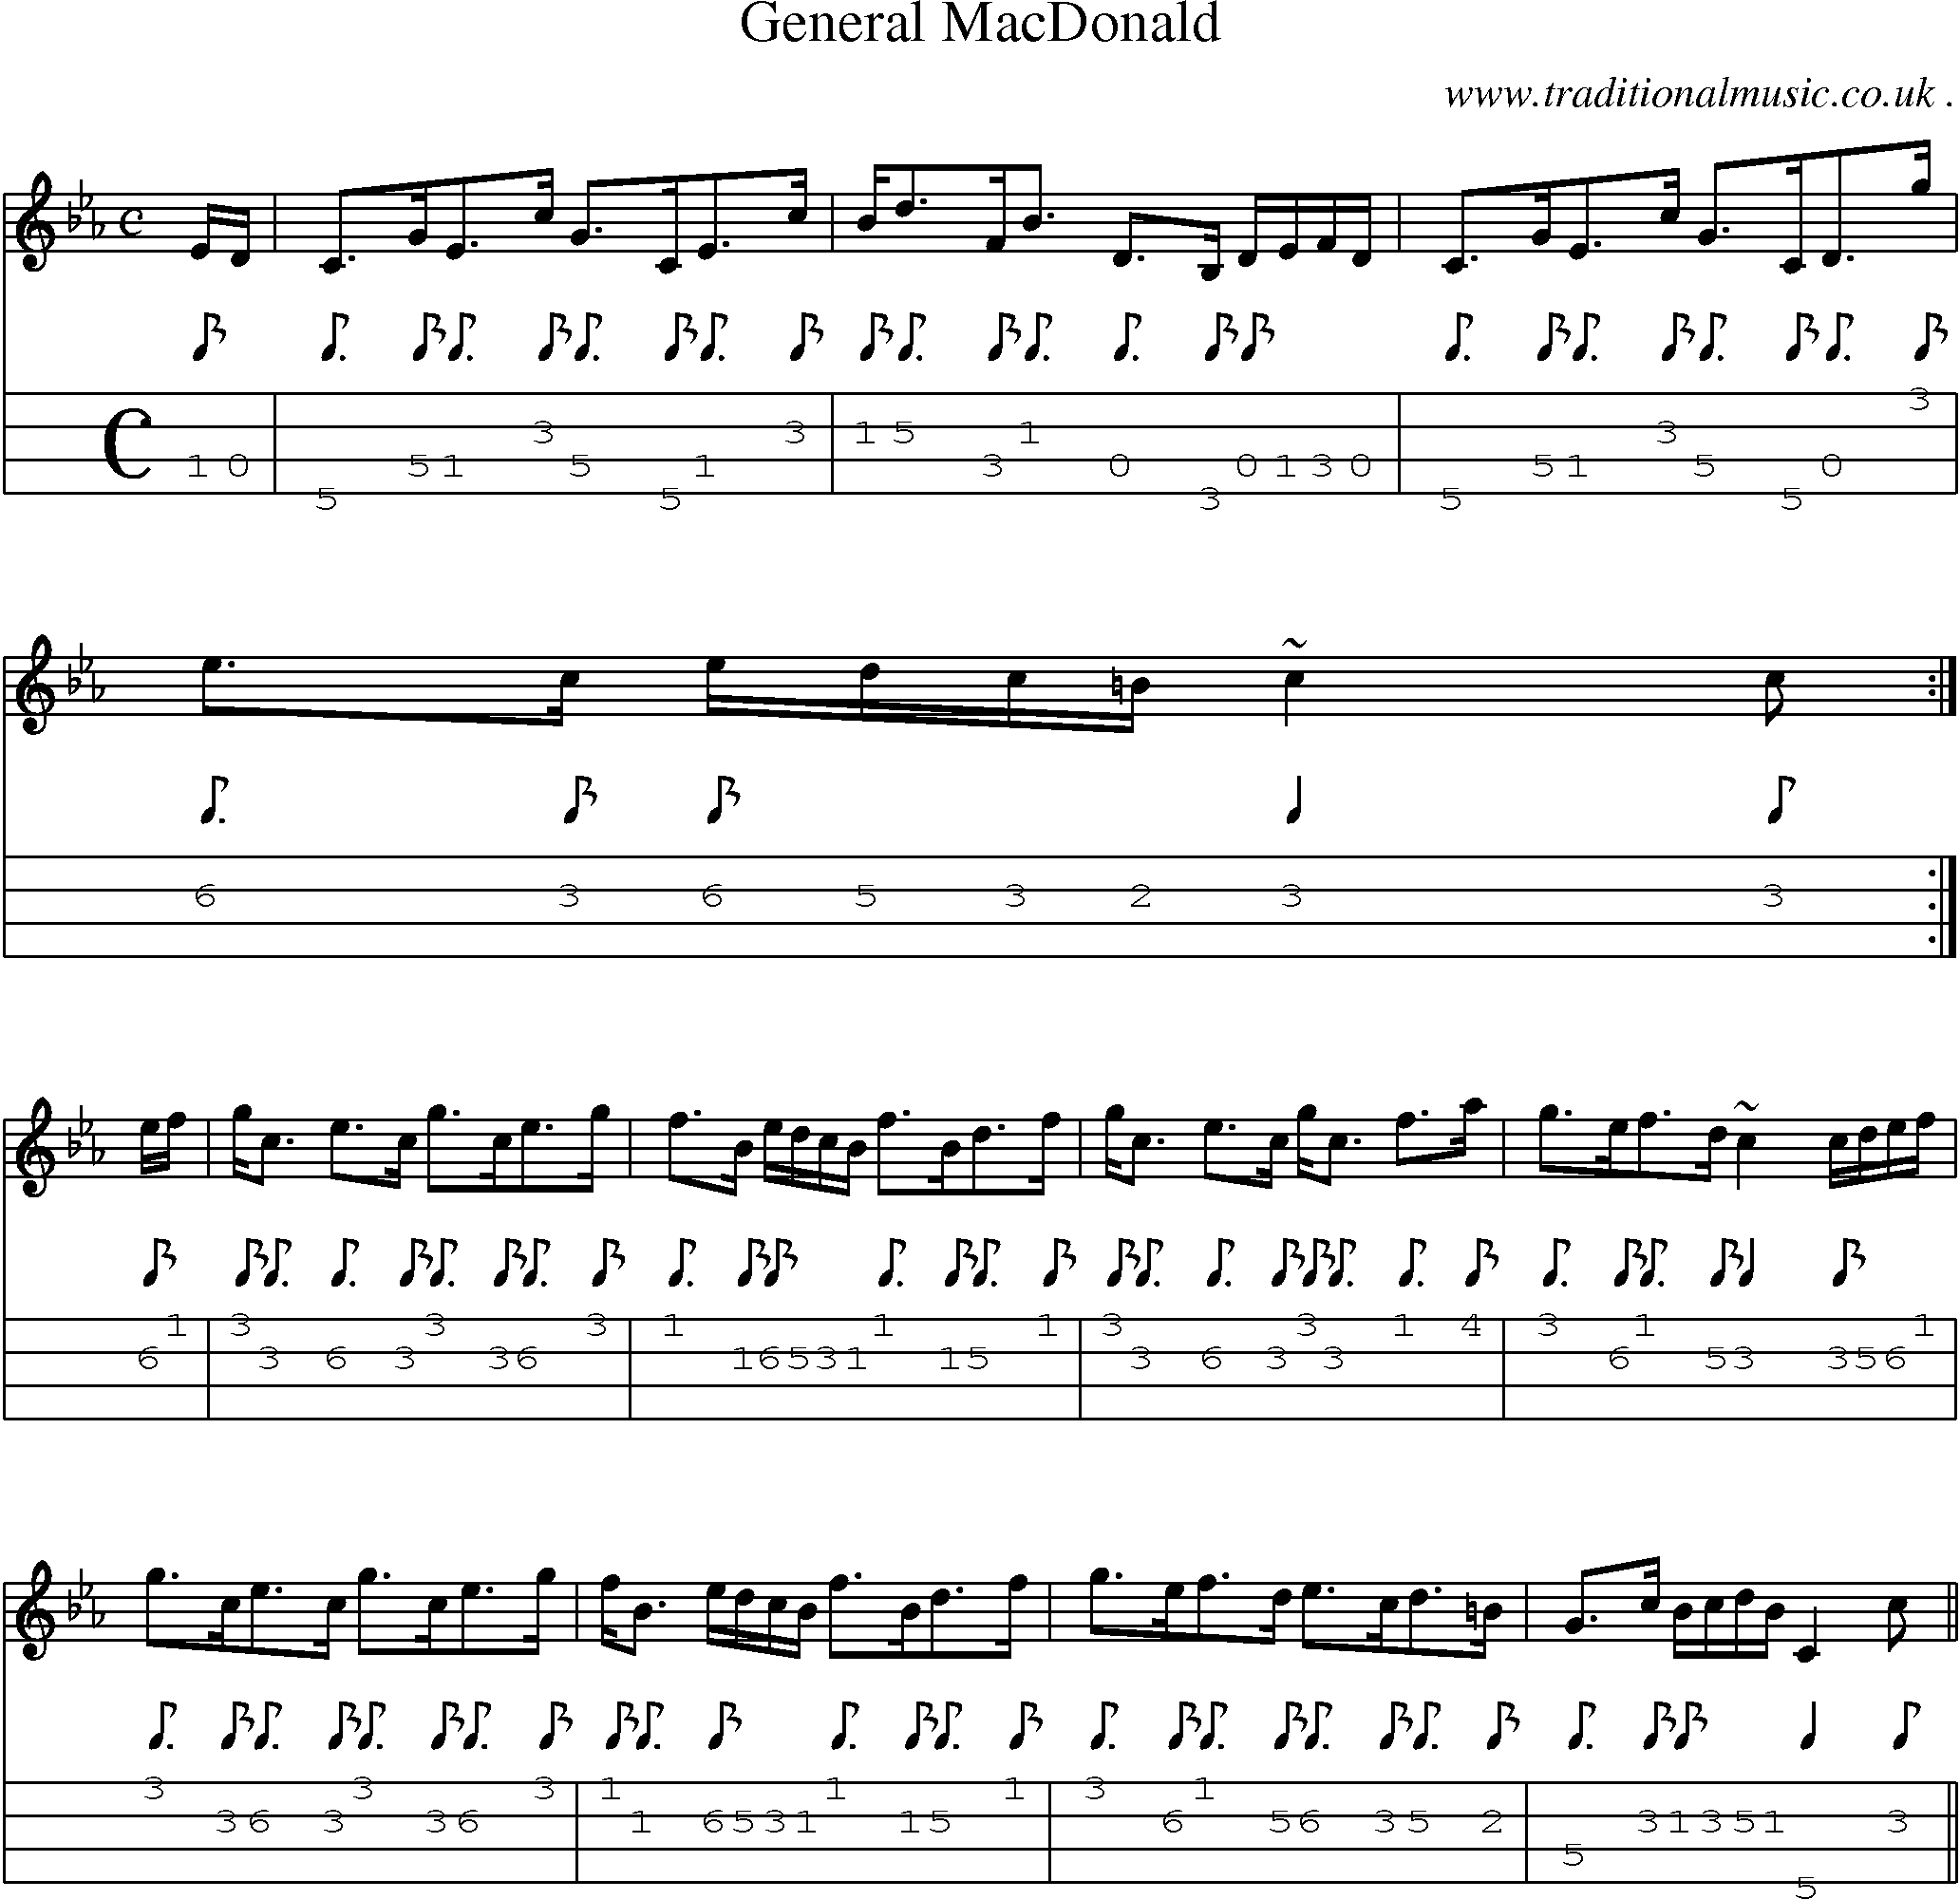 Sheet-music  score, Chords and Mandolin Tabs for General Macdonald